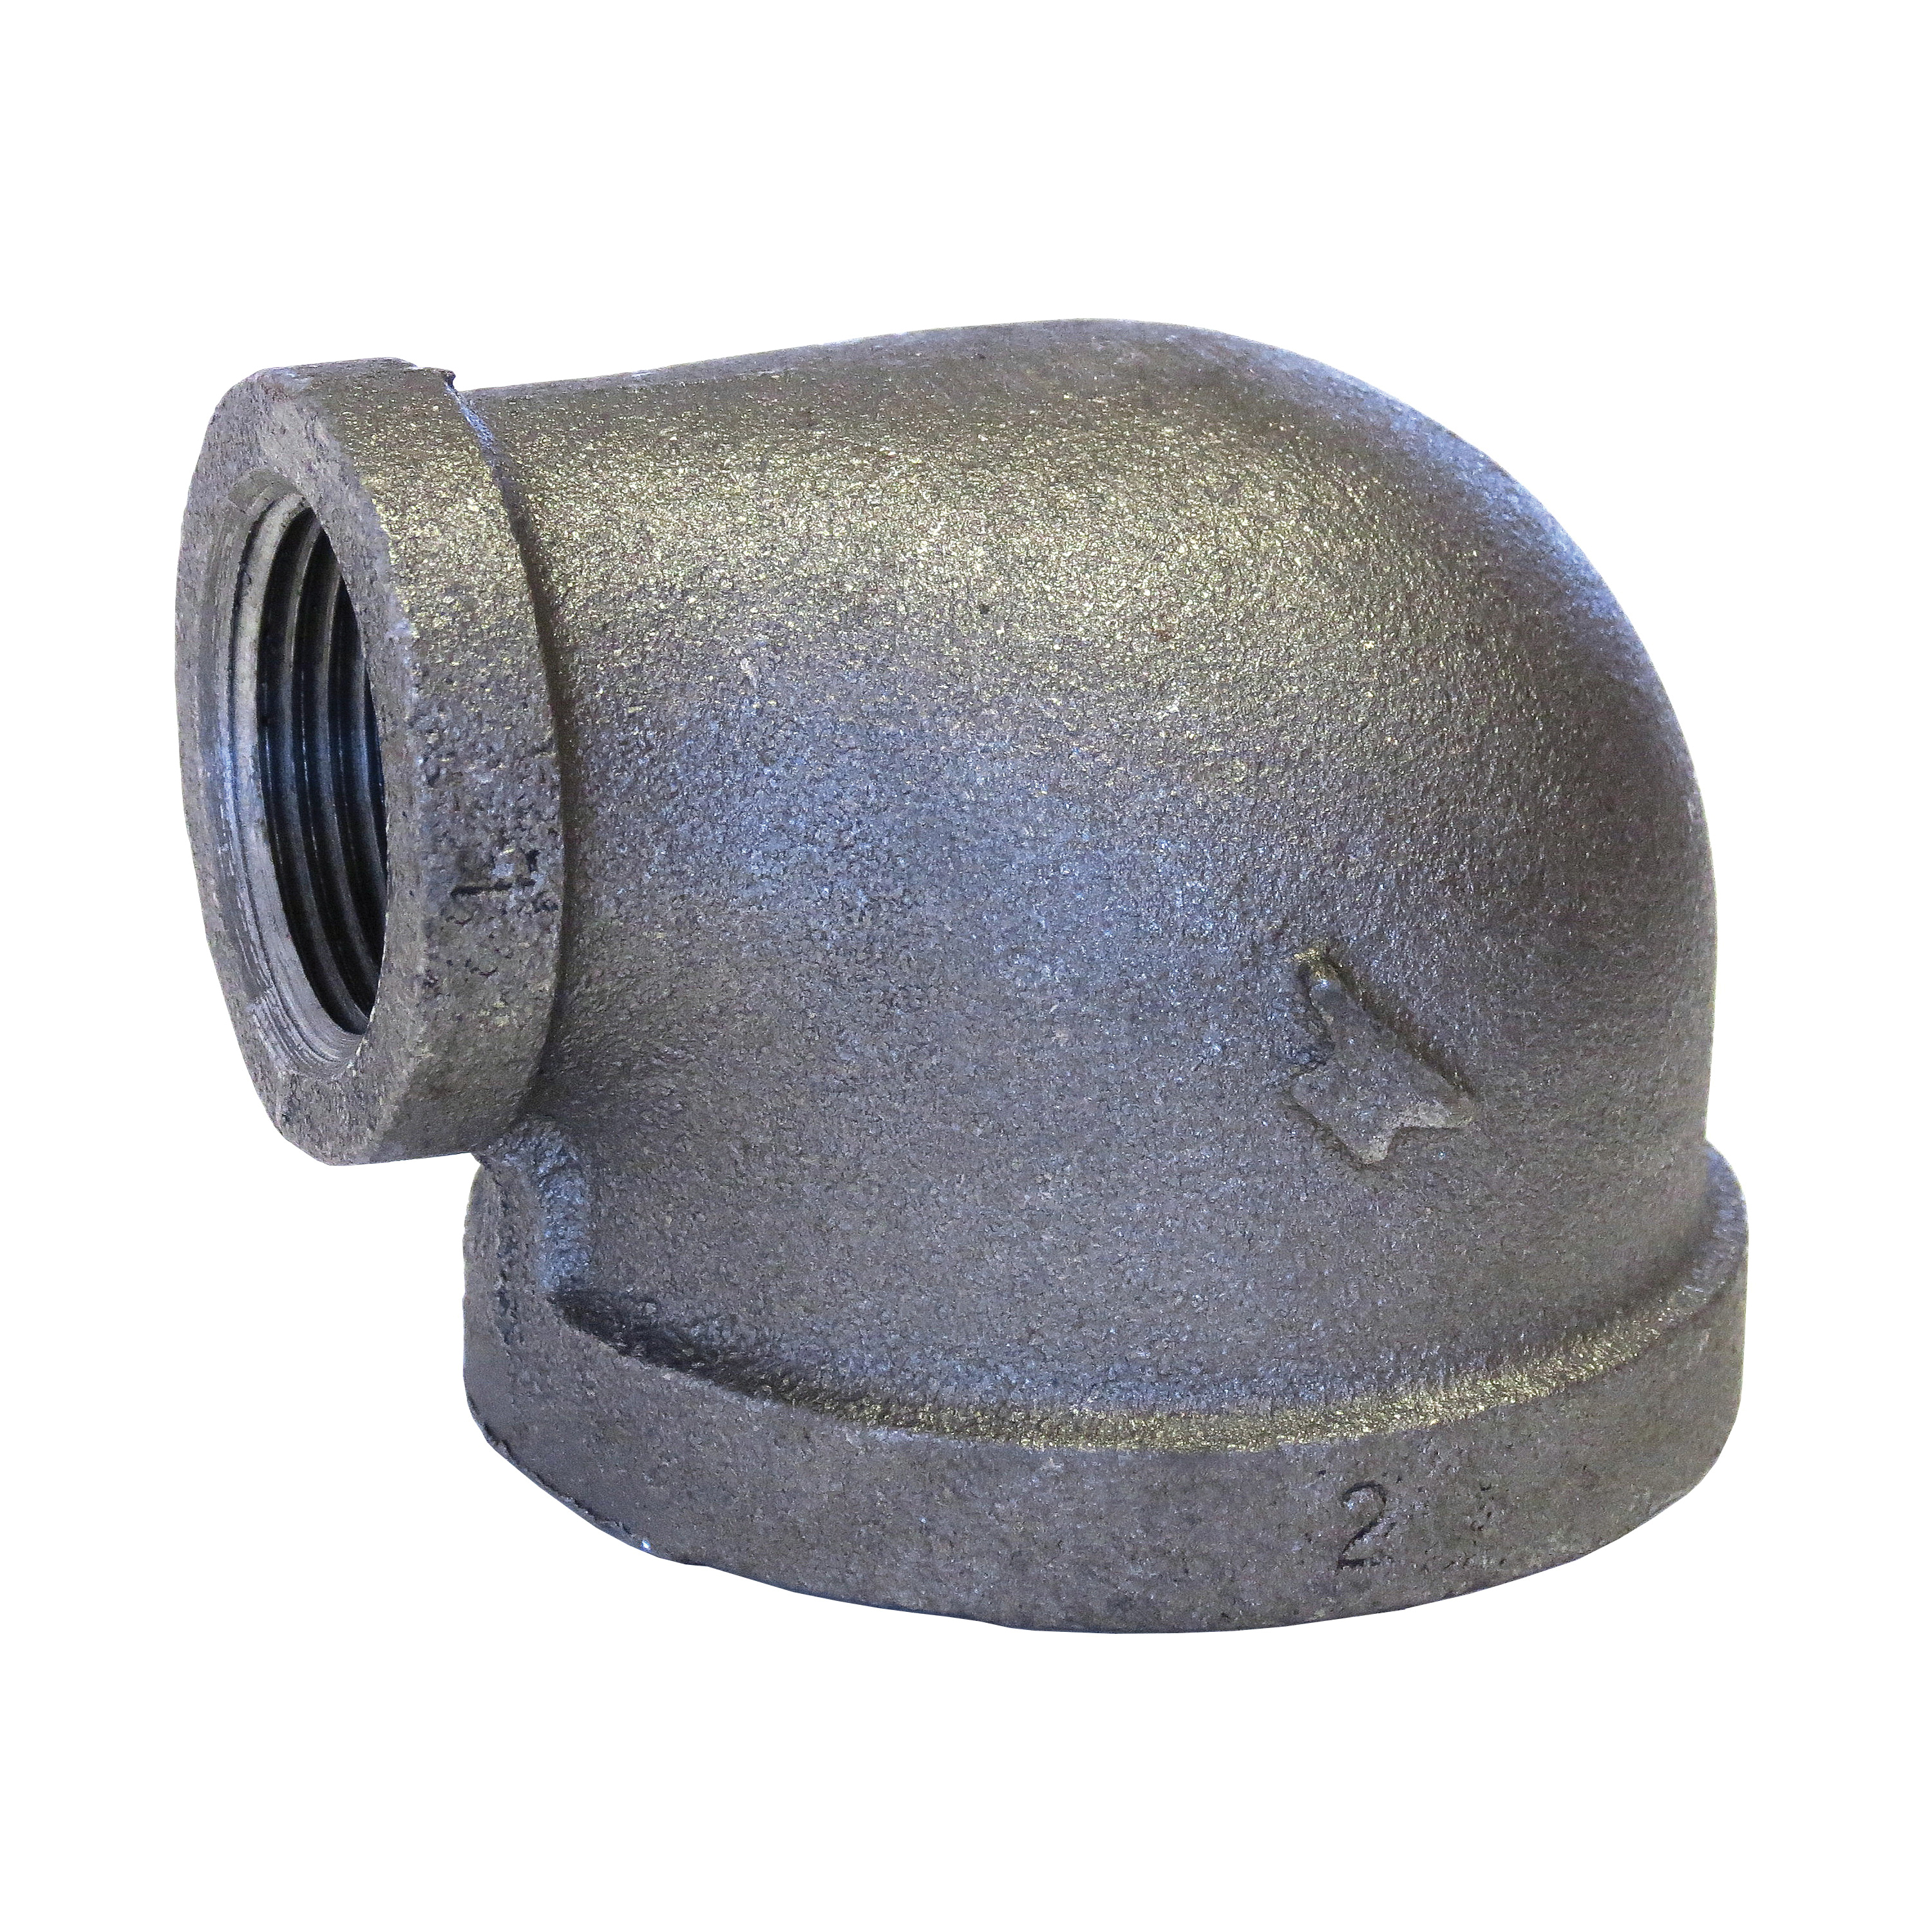 SPF/Anvil™ 0811009612 FIG 3101R 90 deg Pipe Reducing Elbow, 1-1/2 x 1-1/4 in Nominal, FNPT End Style, 150 lb, Malleable Iron, Galvanized, Import